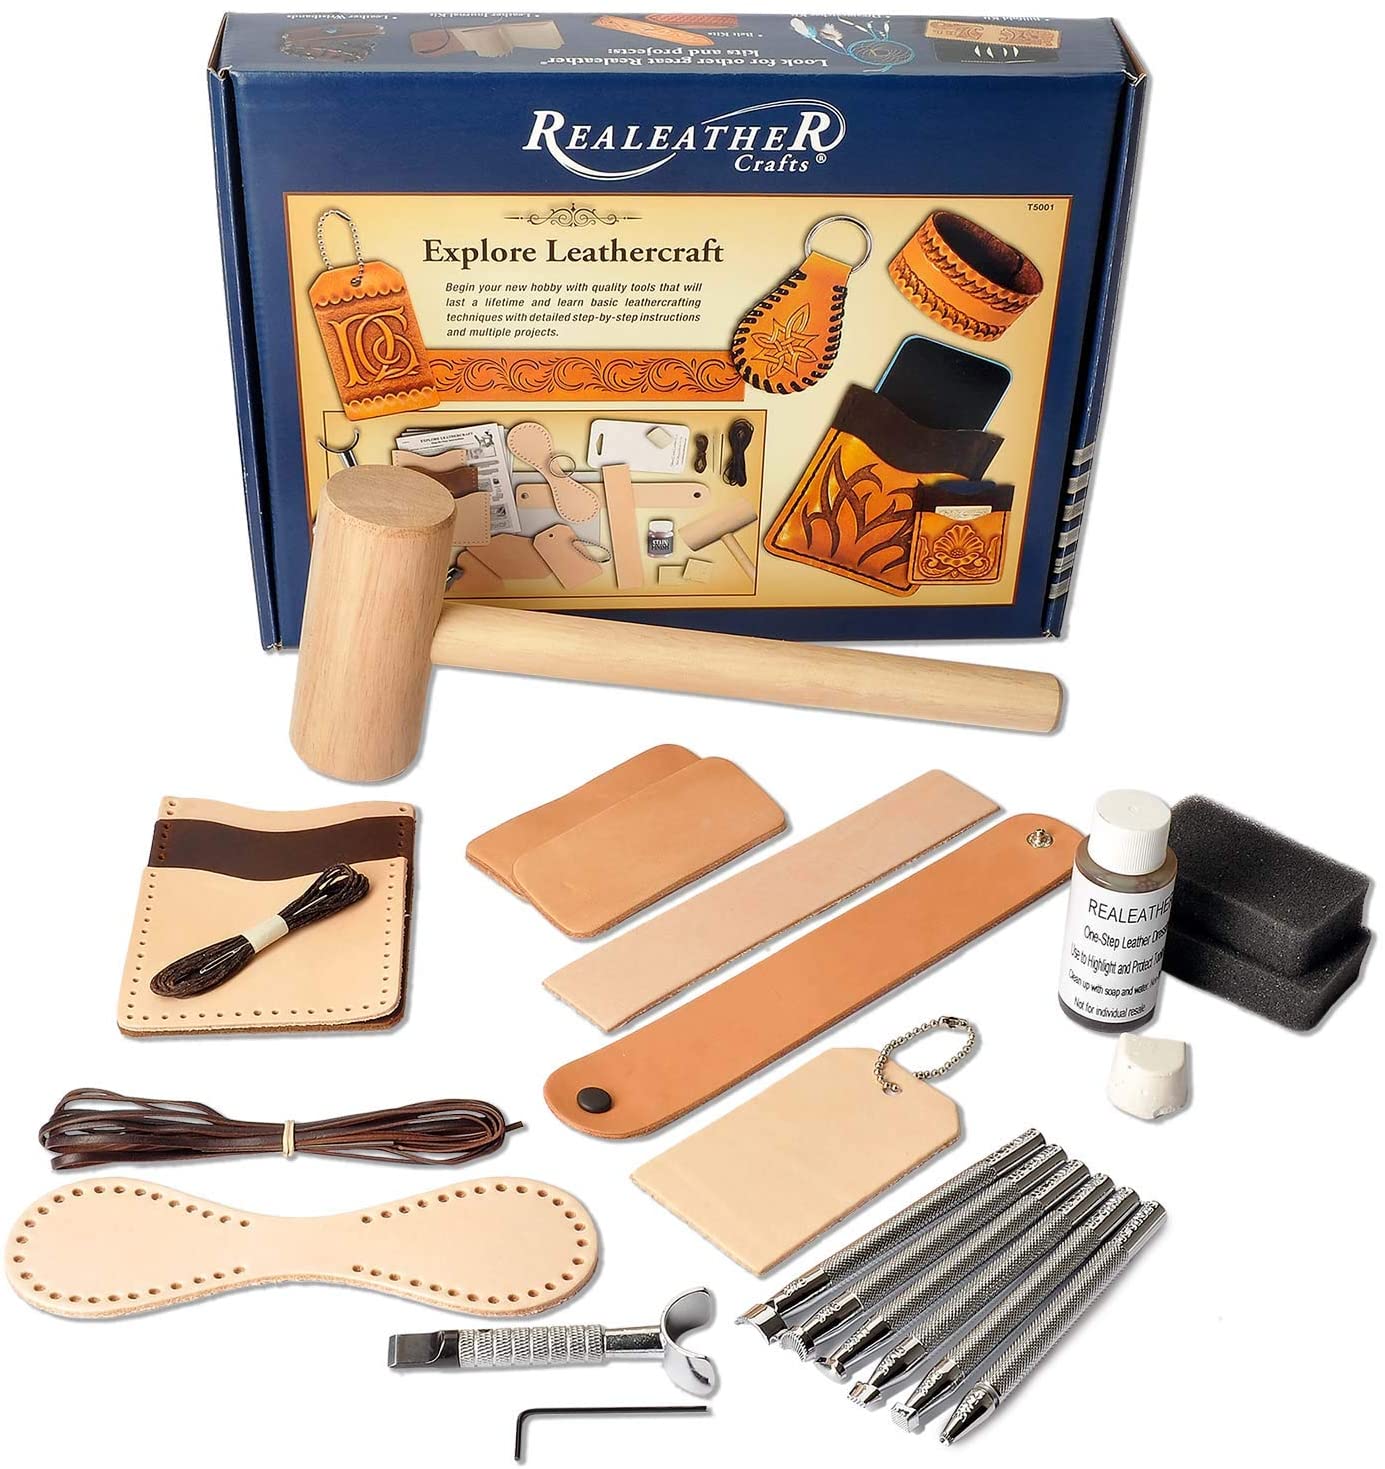 Realeather beginner leatherworking kit gift ideas for dad